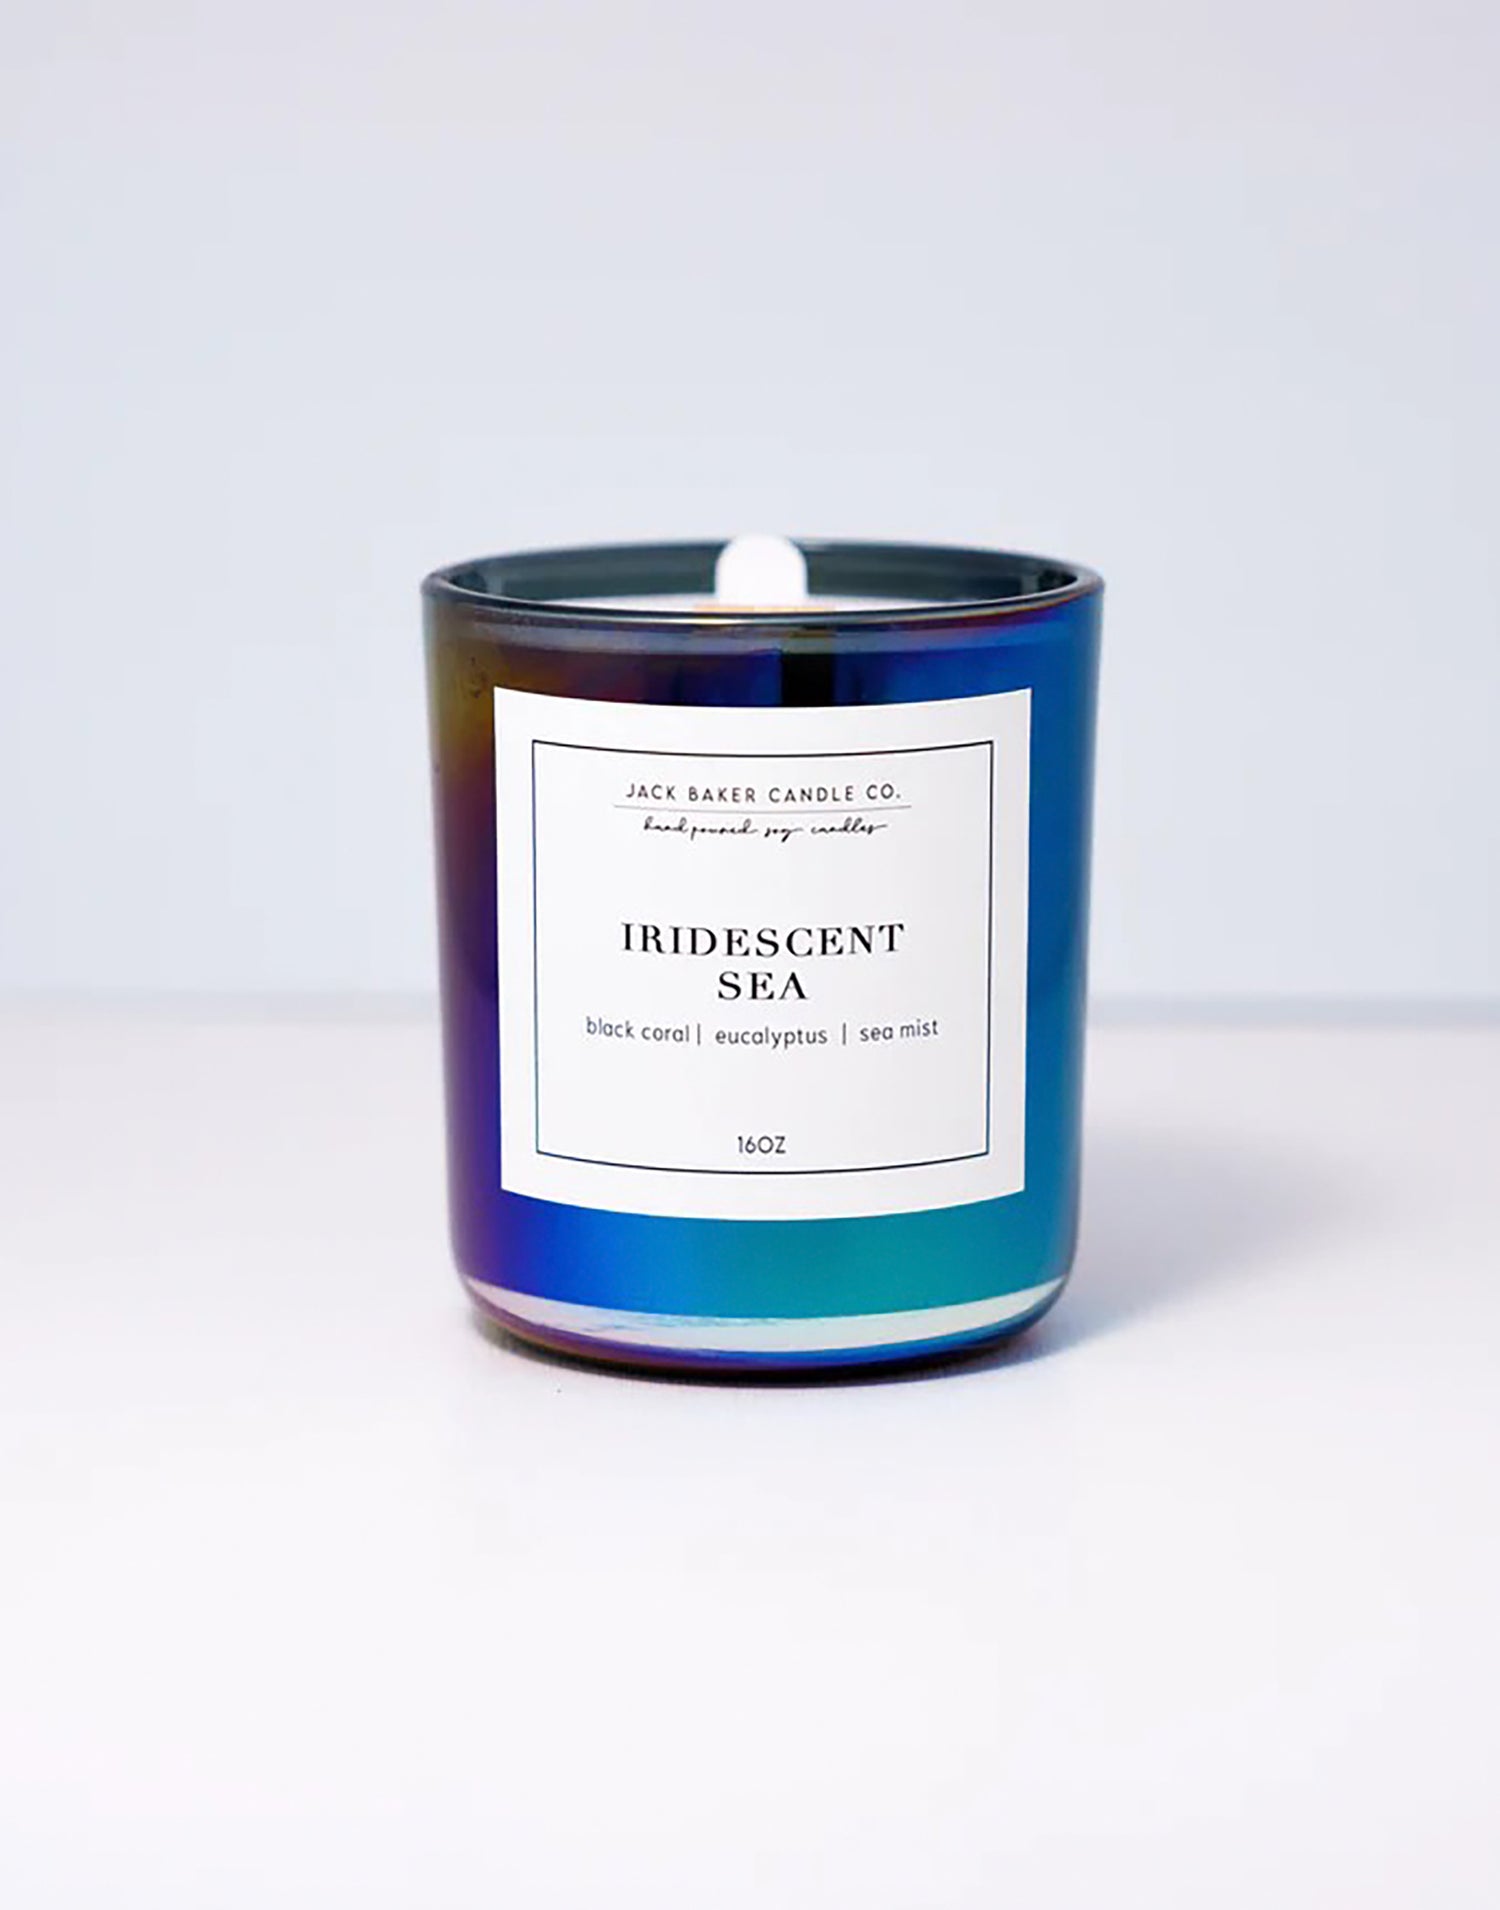 Iridescent Sea Candle by Jack Baker Candle Co. - Product View